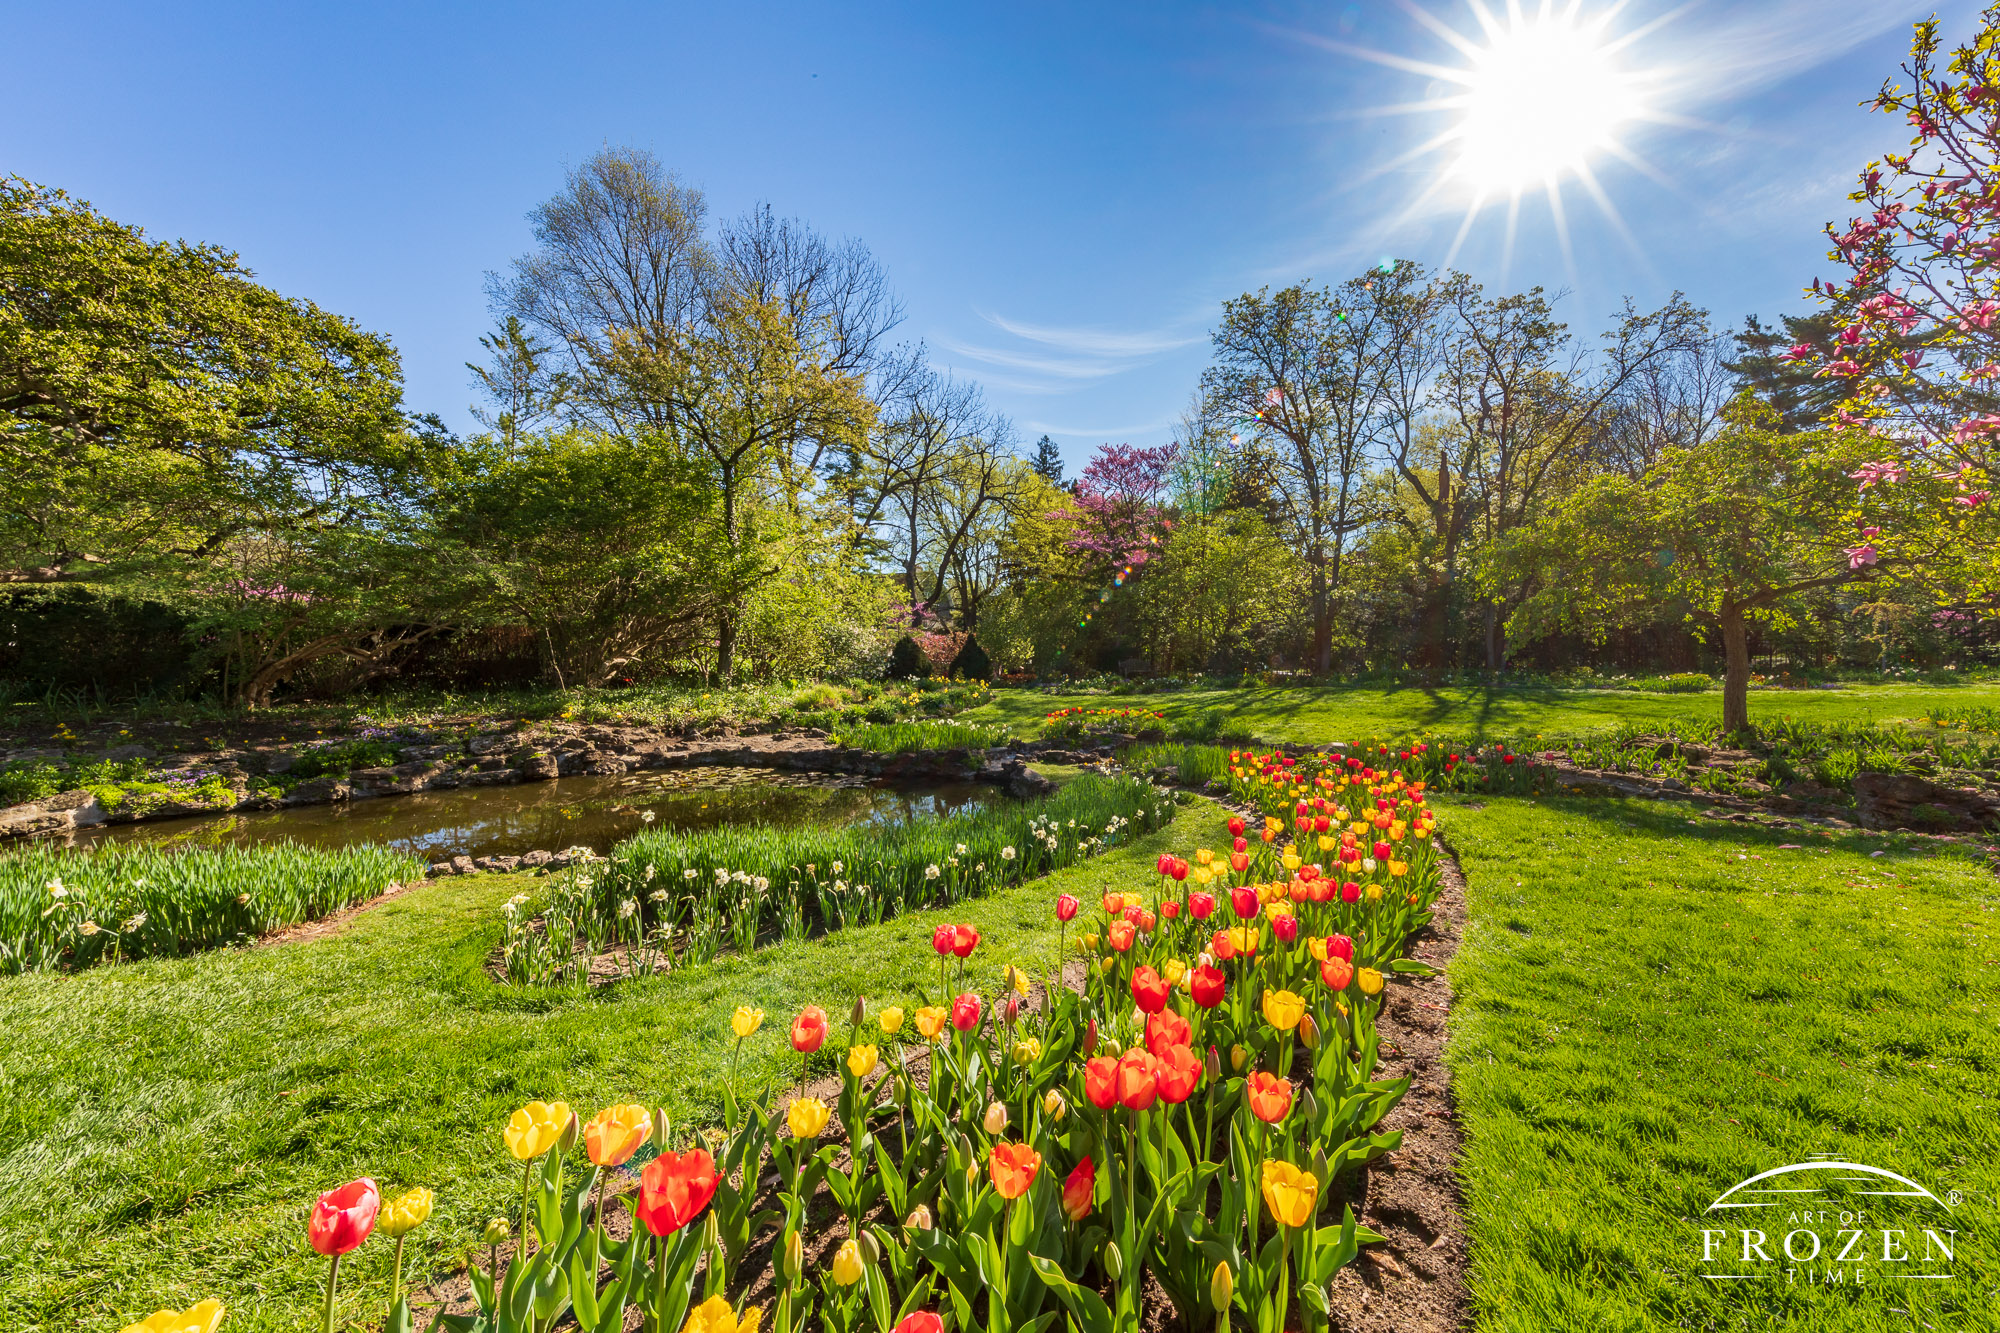 The Smith Gardens in Oakwood Ohio where a flower bed of red and yellow tulips stretch into the scene under blue skies.